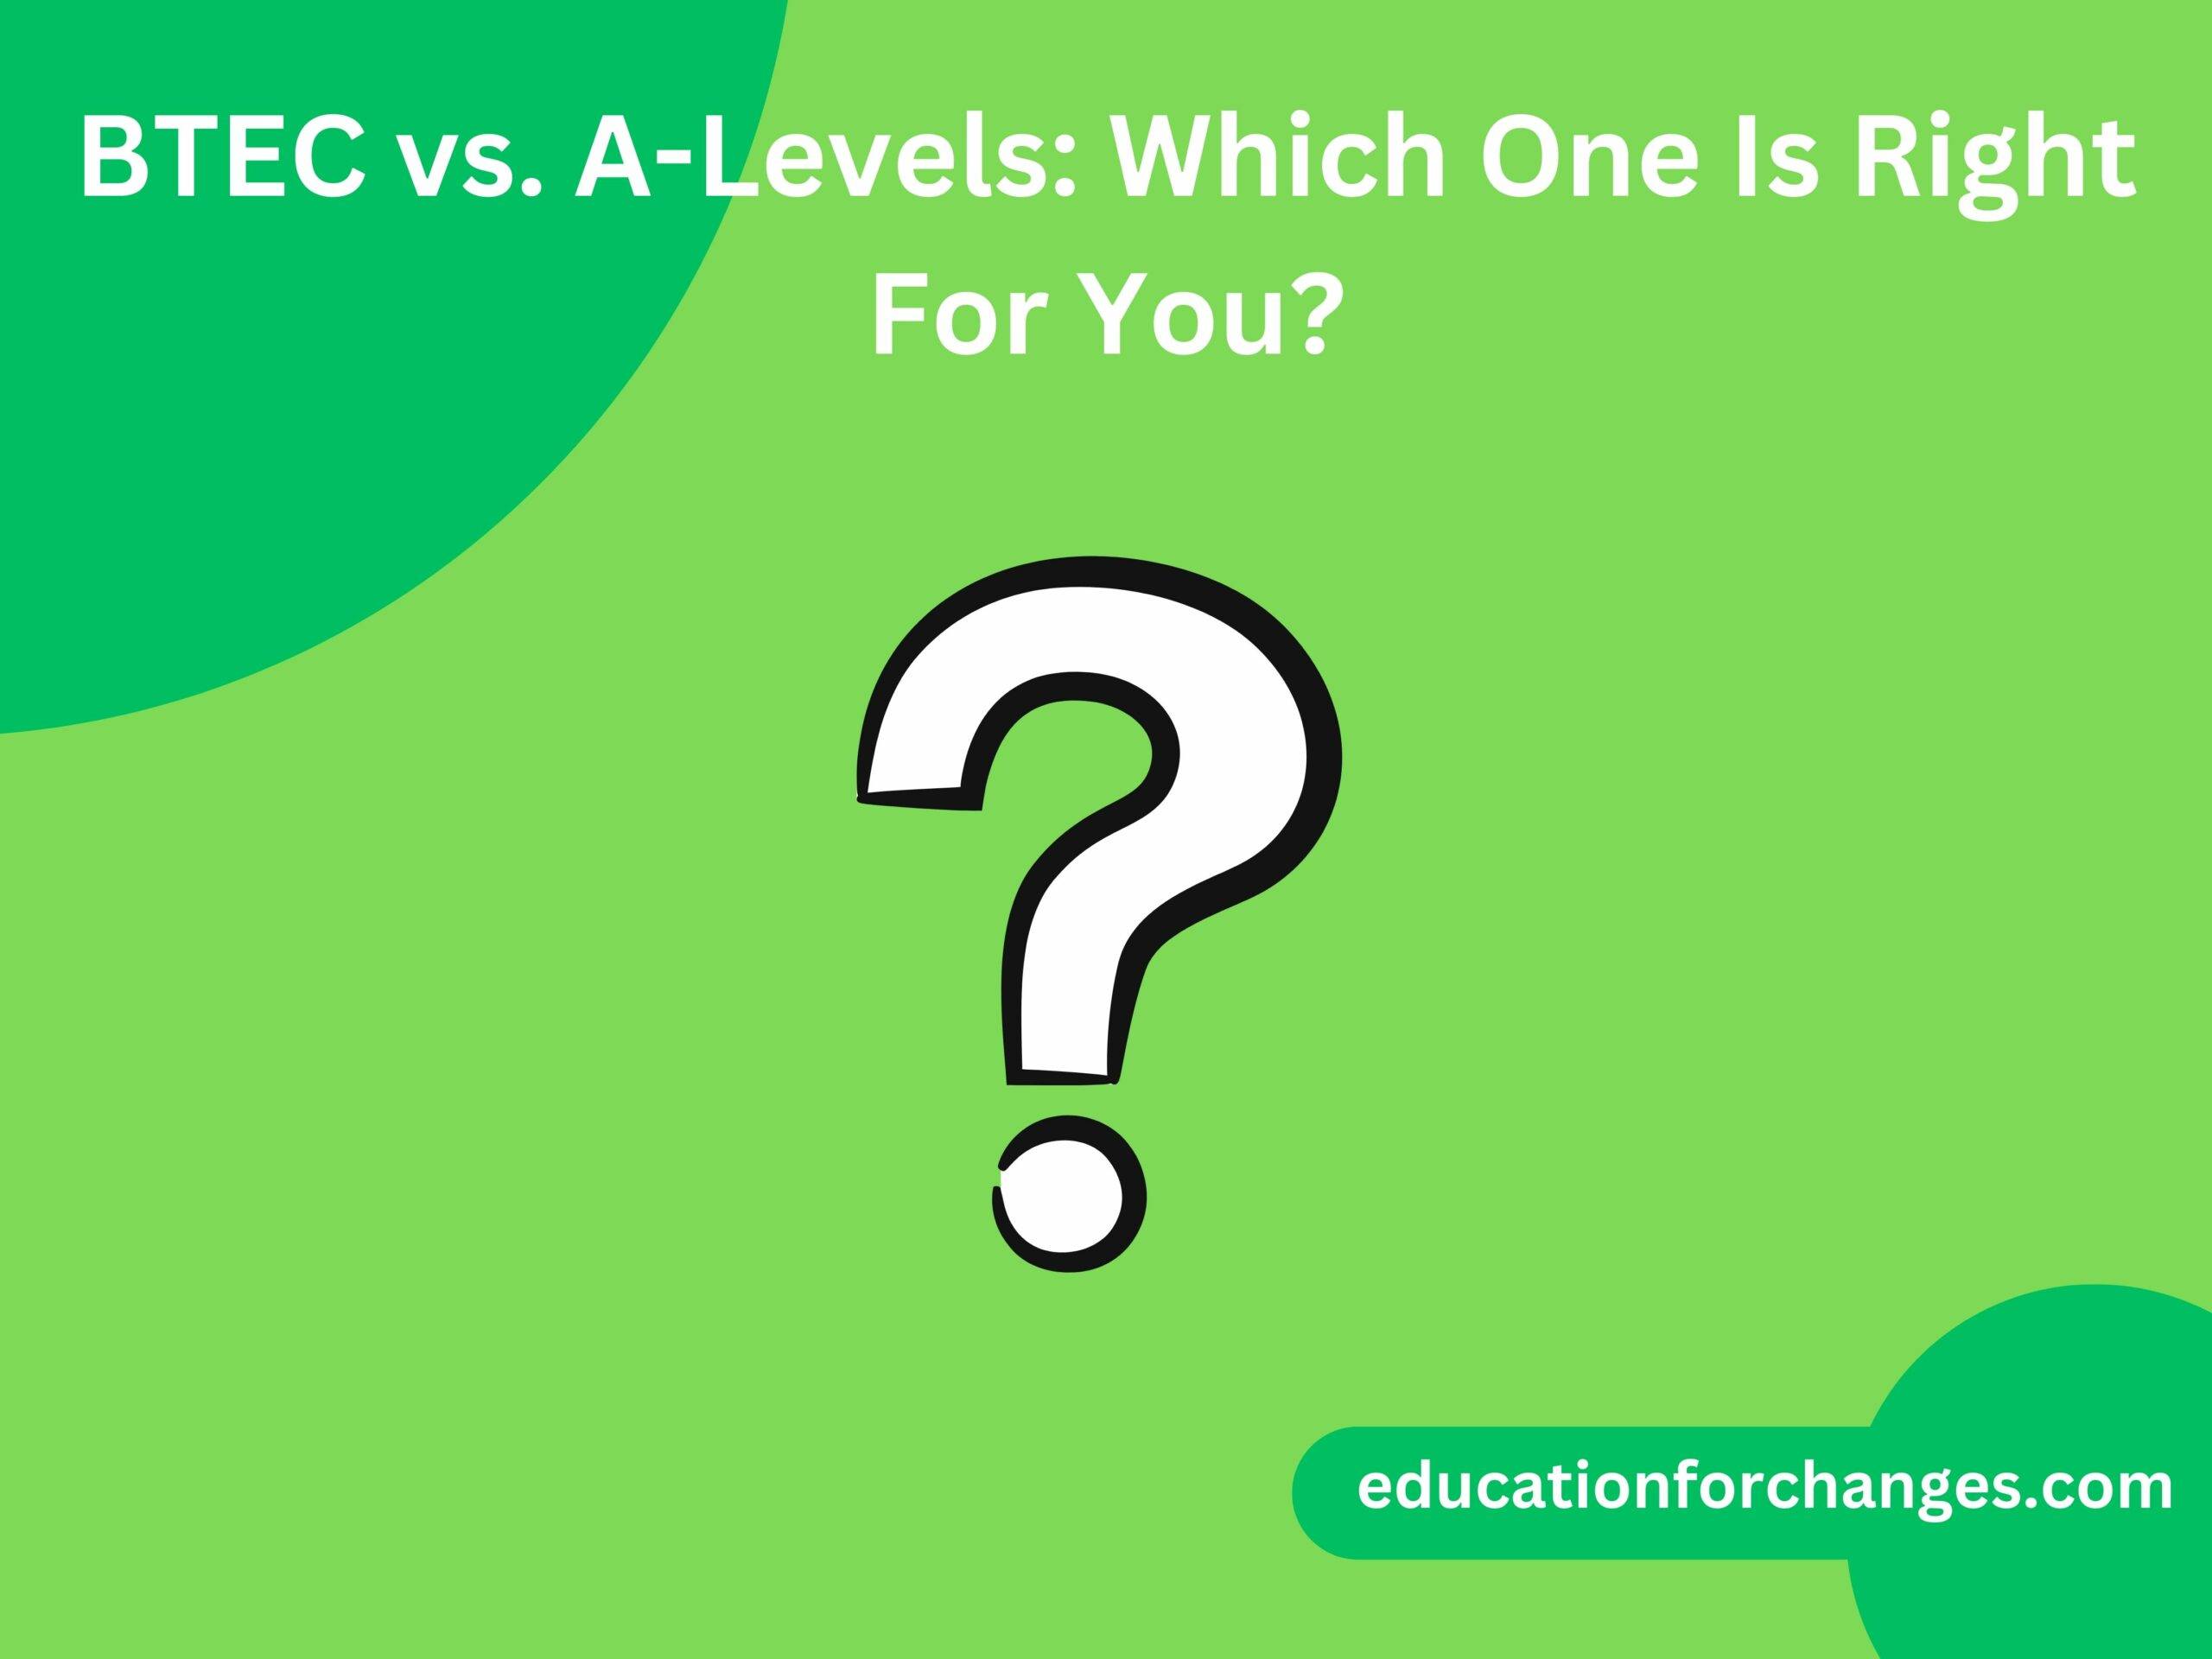 BTEC vs. A-Levels: Which One Is Right For You